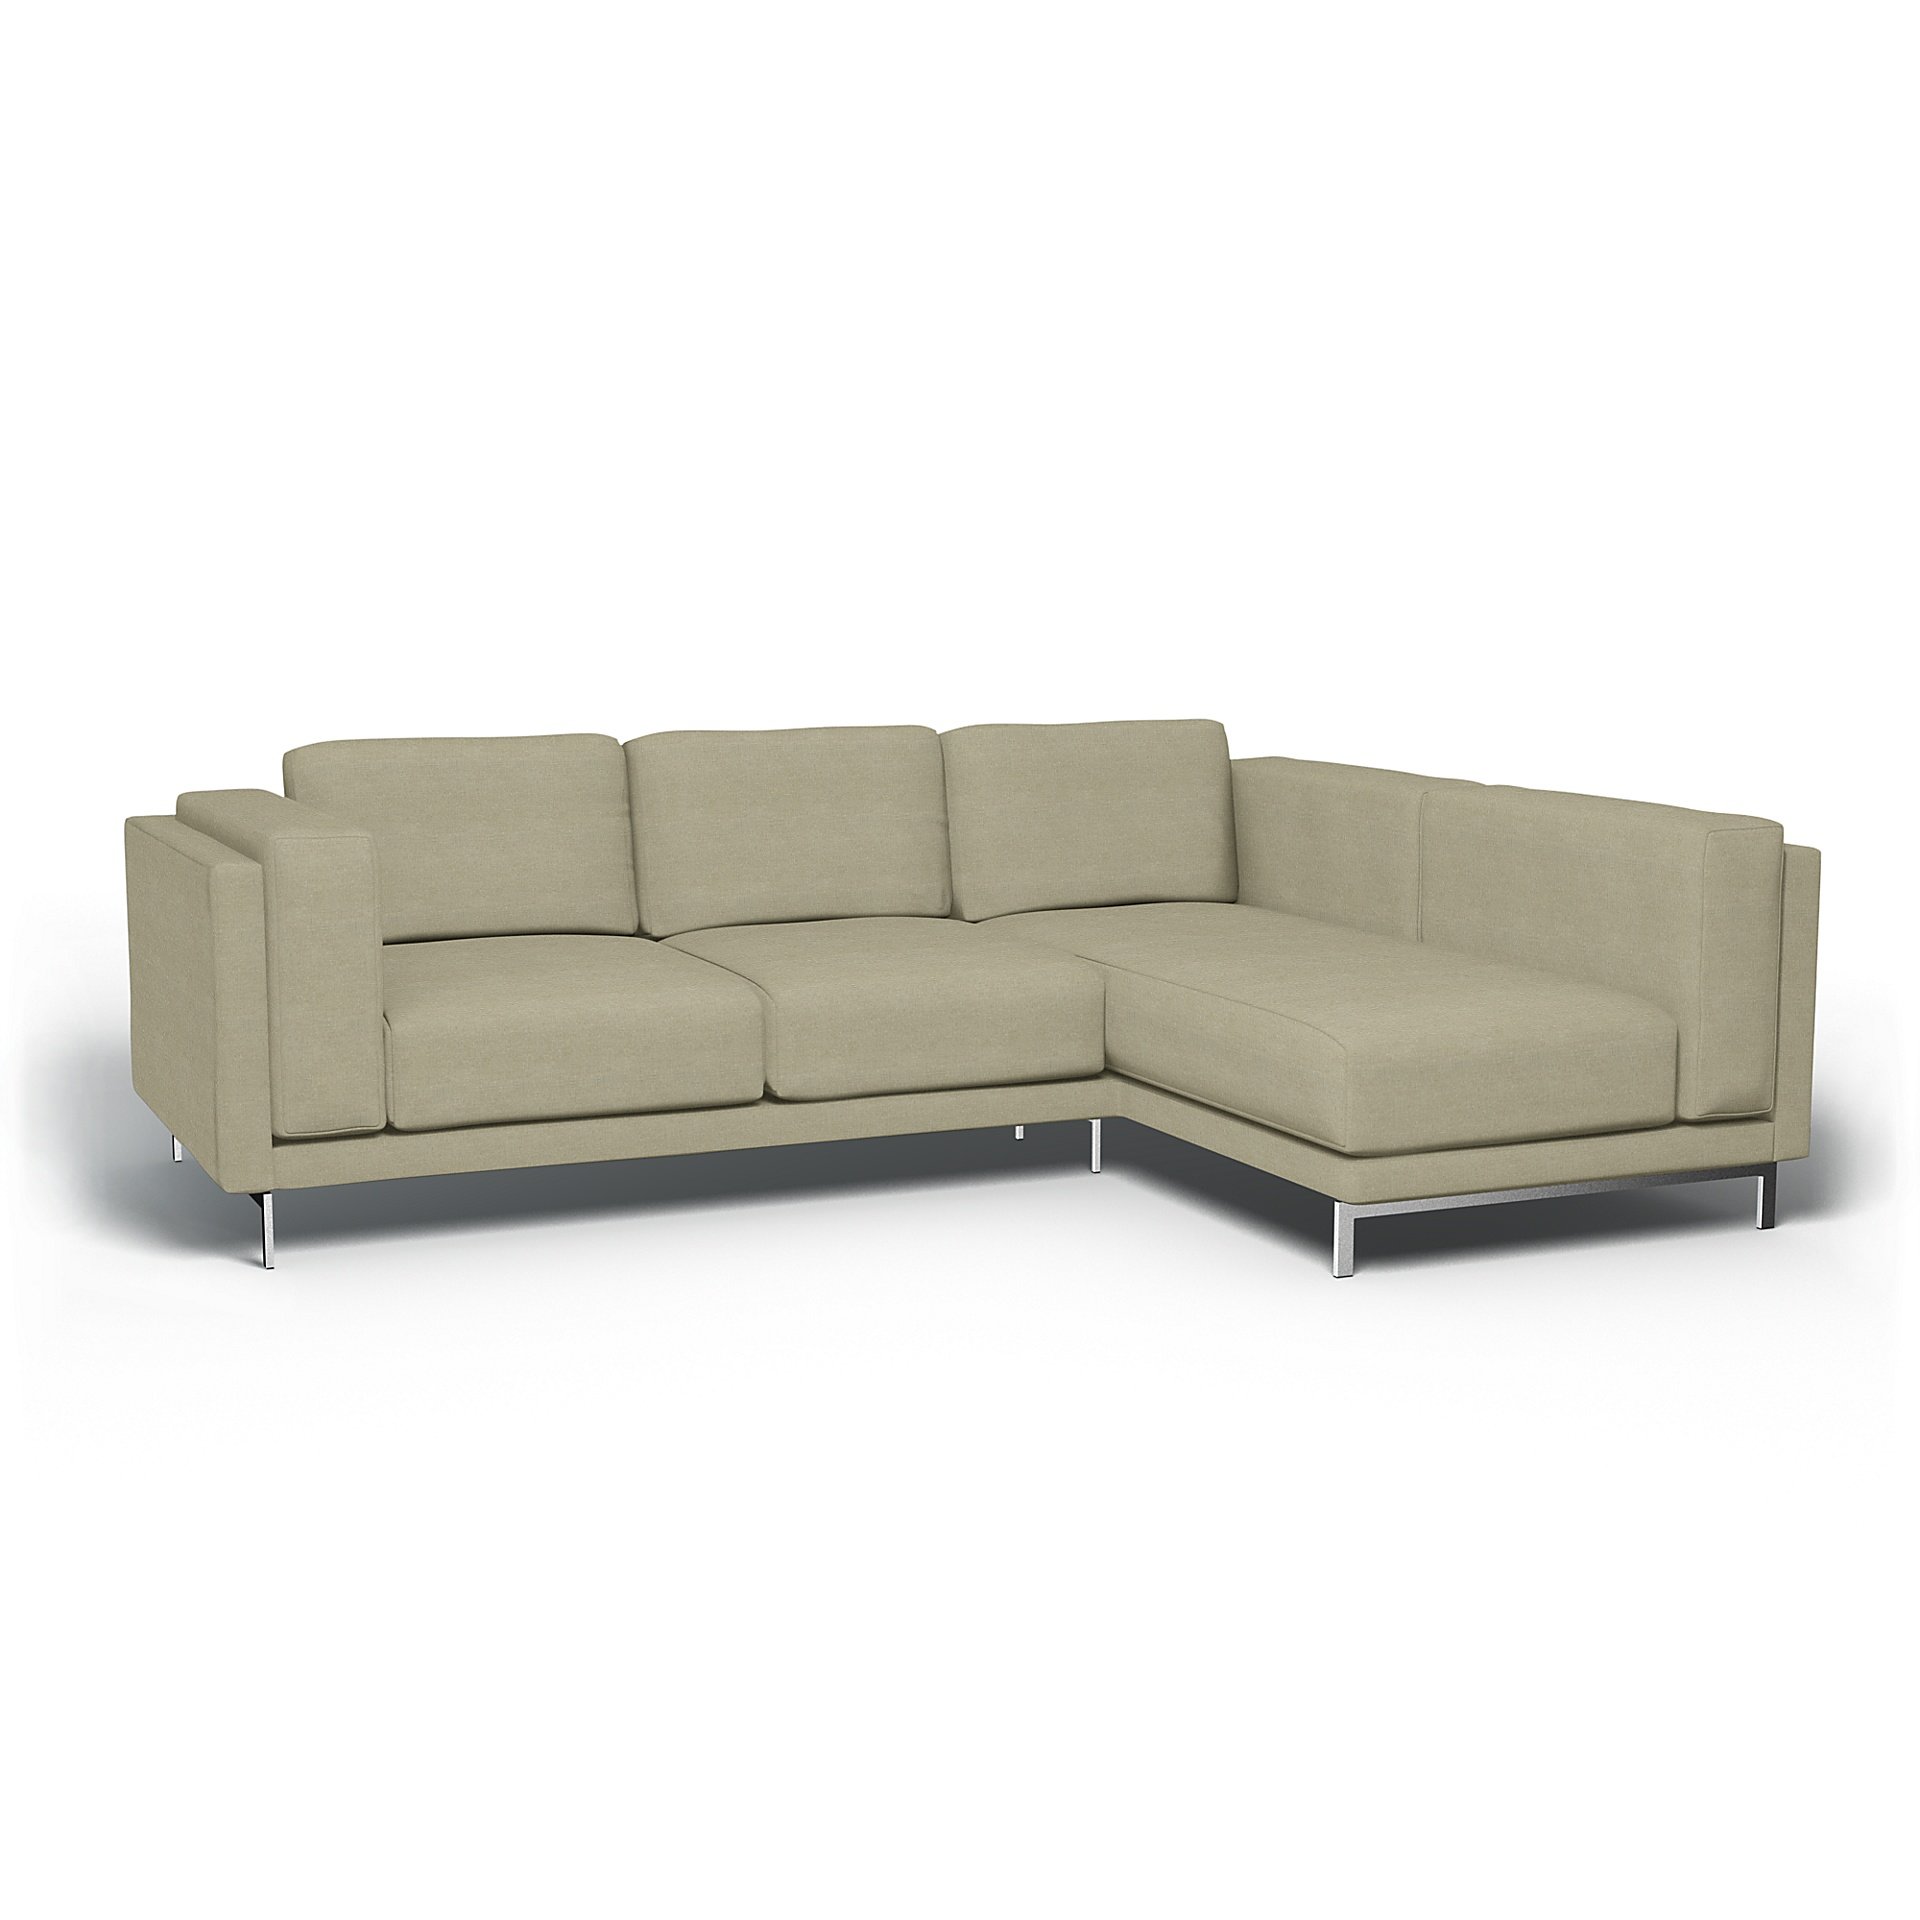 IKEA - Nockeby 3 Seat Sofa with Right Chaise Cover, Pebble, Linen - Bemz